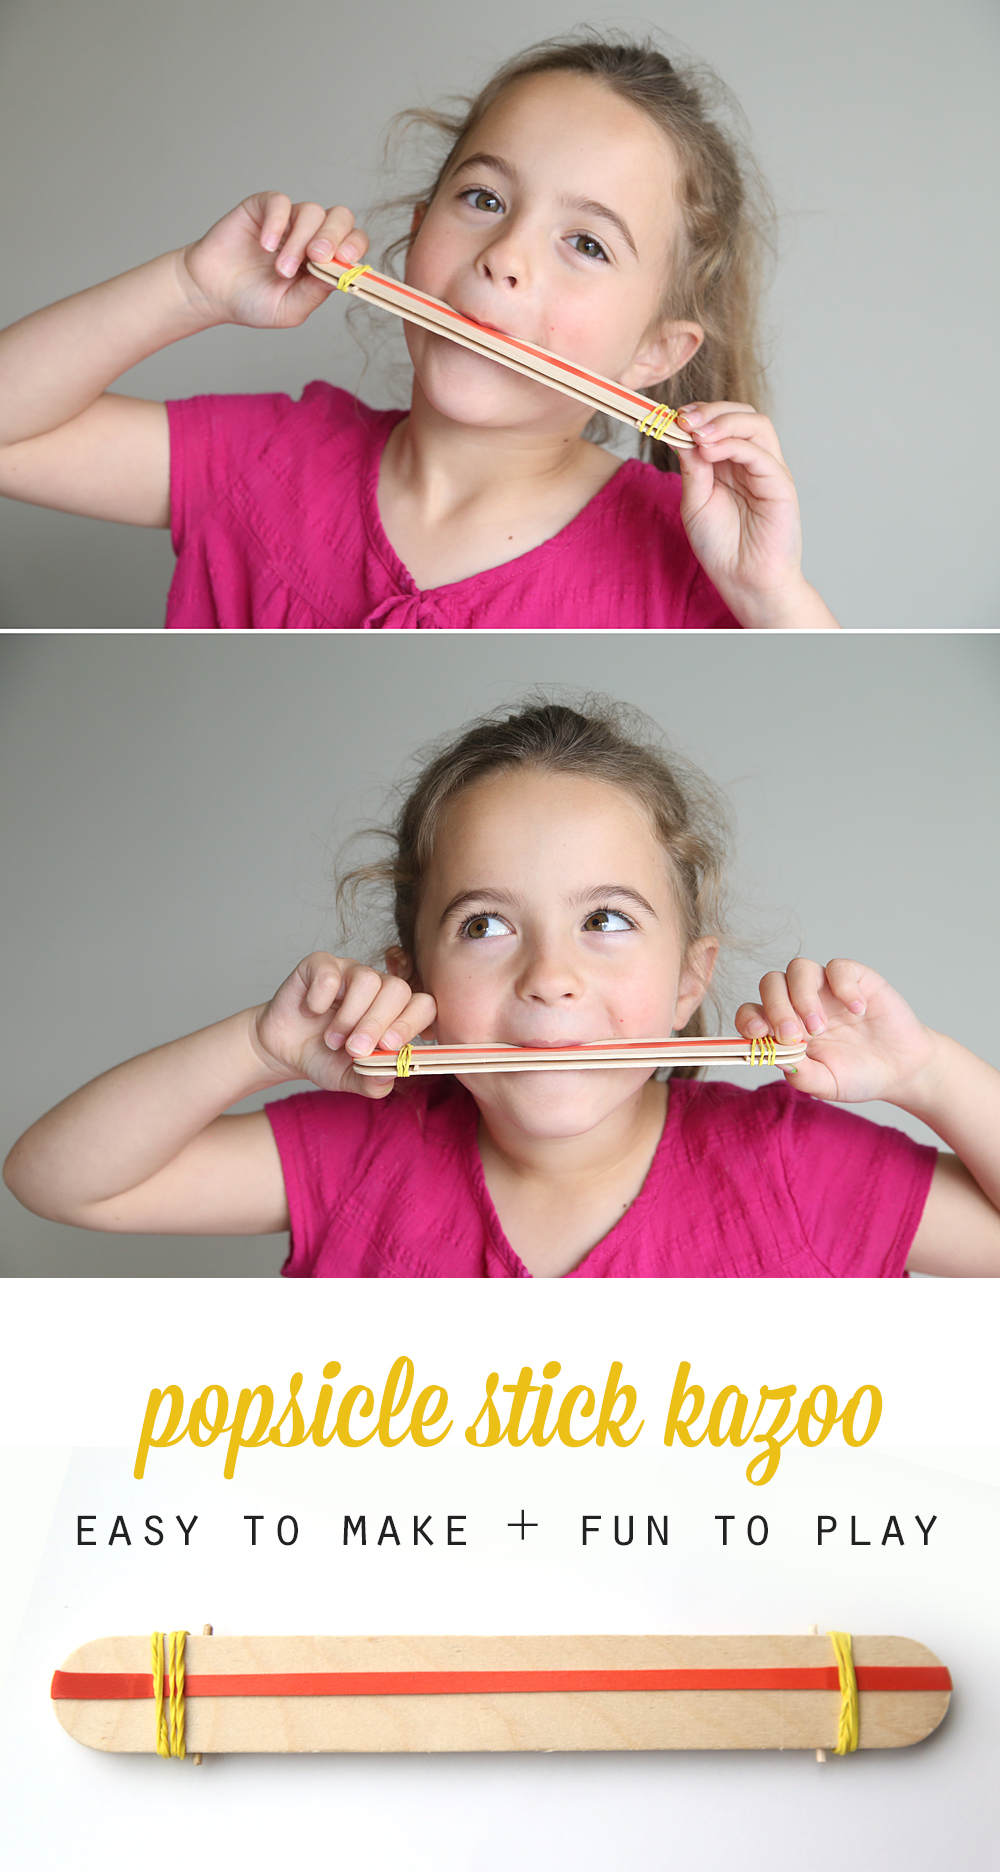 Girl playing DIY kazoo made with craft sticks and rubber bands